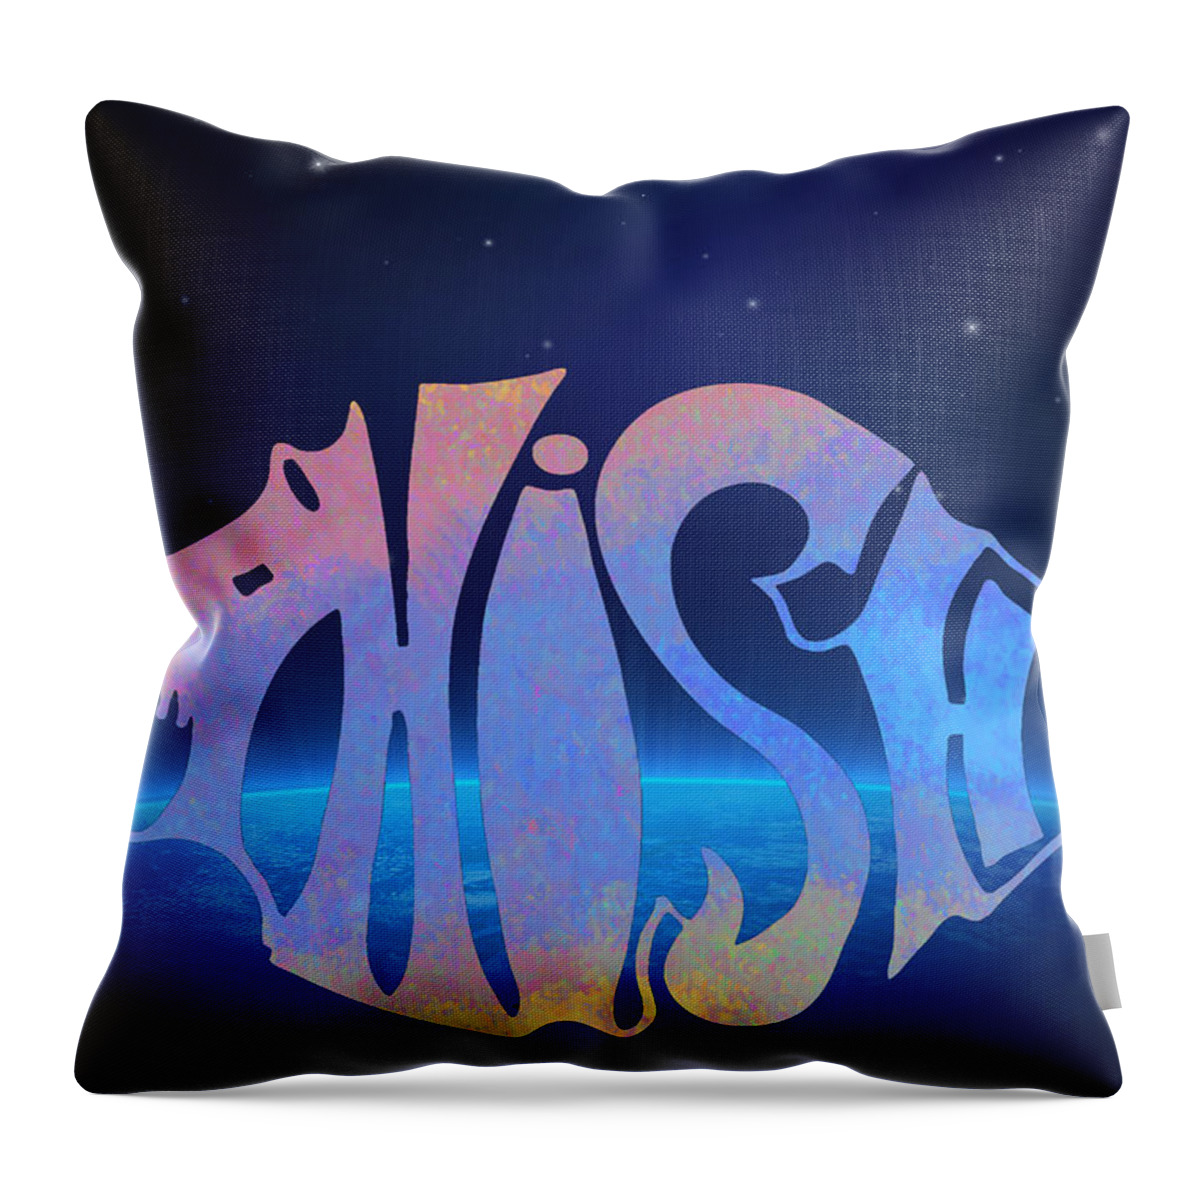 Phish Throw Pillow featuring the photograph Phish by Bill Cannon